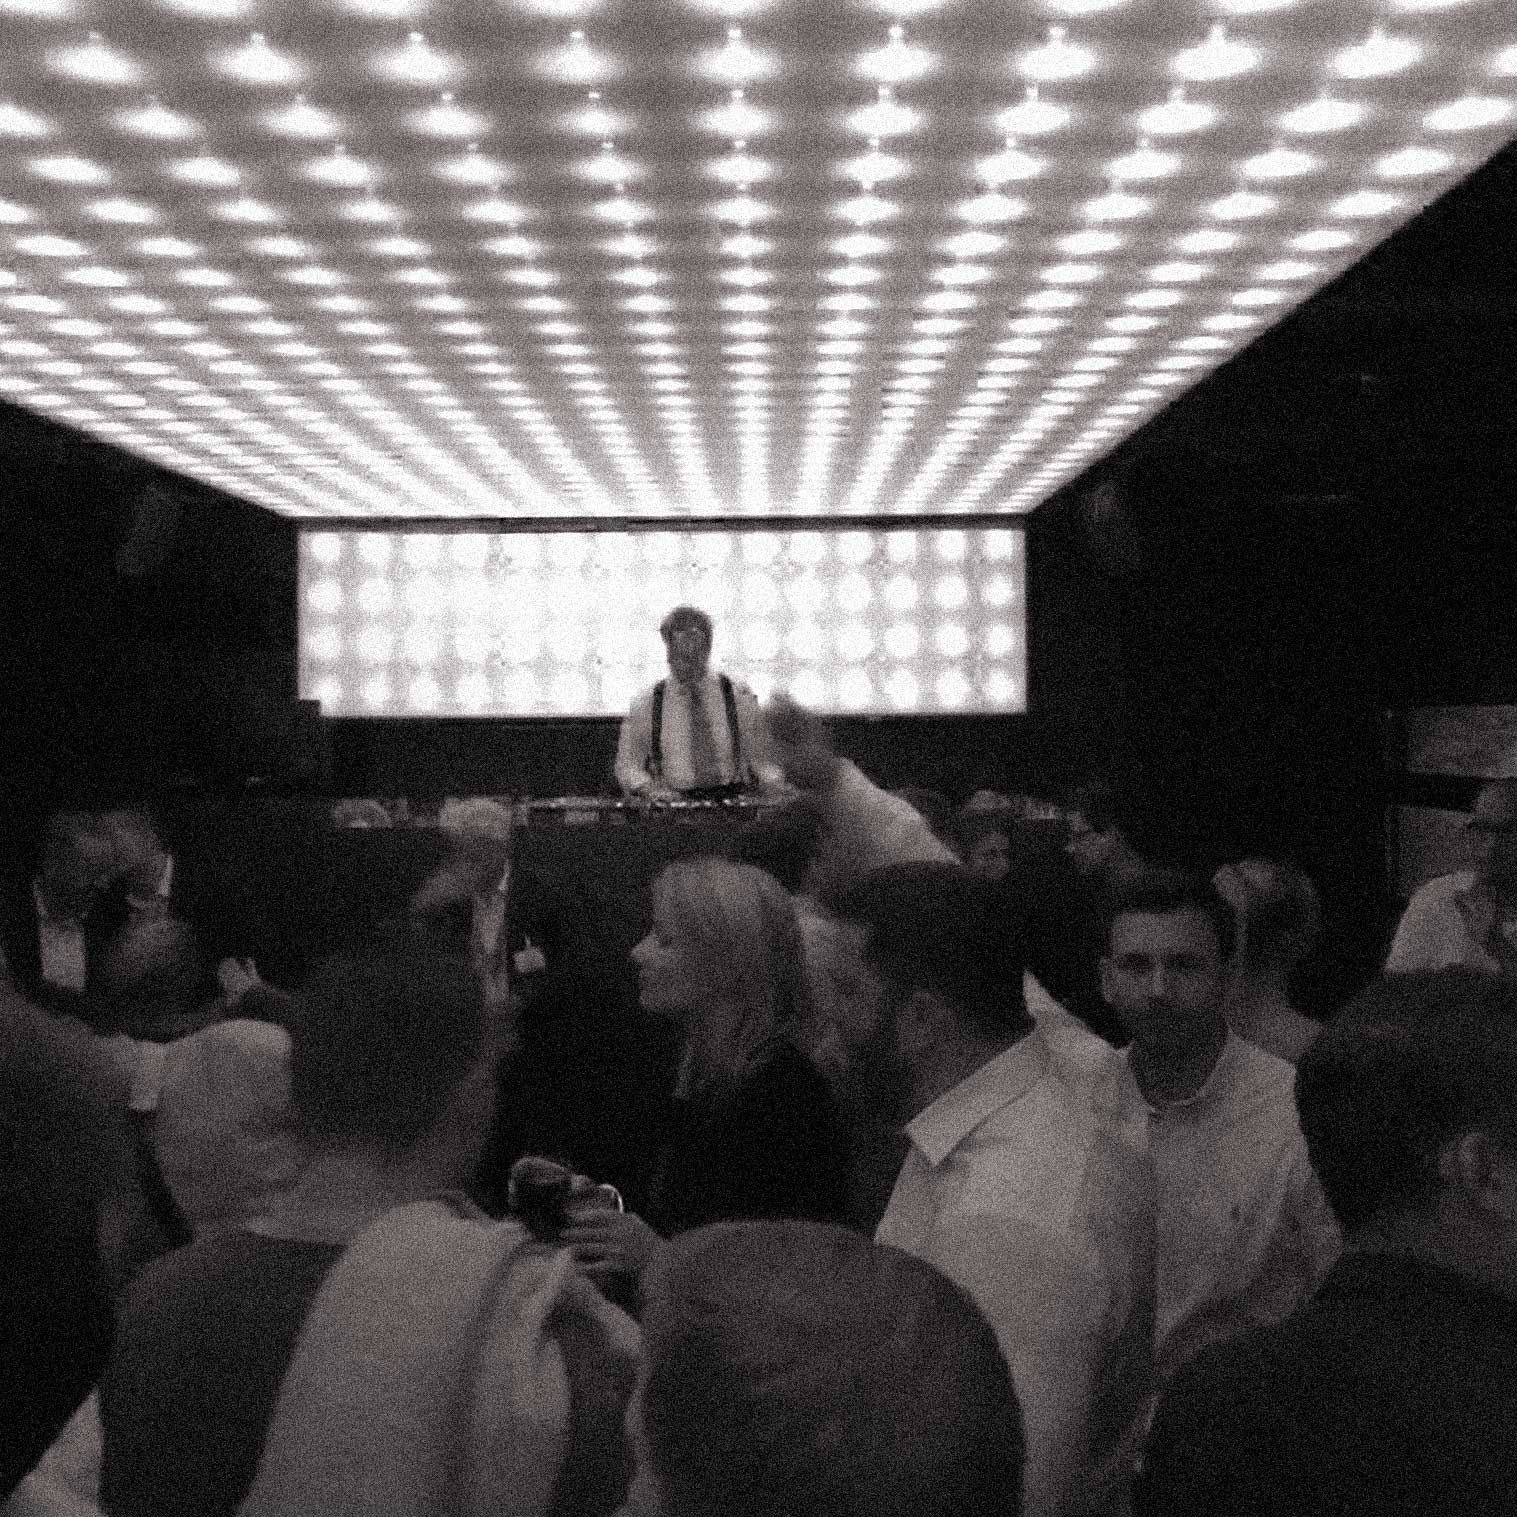 DJ Dandy O. playing in front of dancing people in a club.